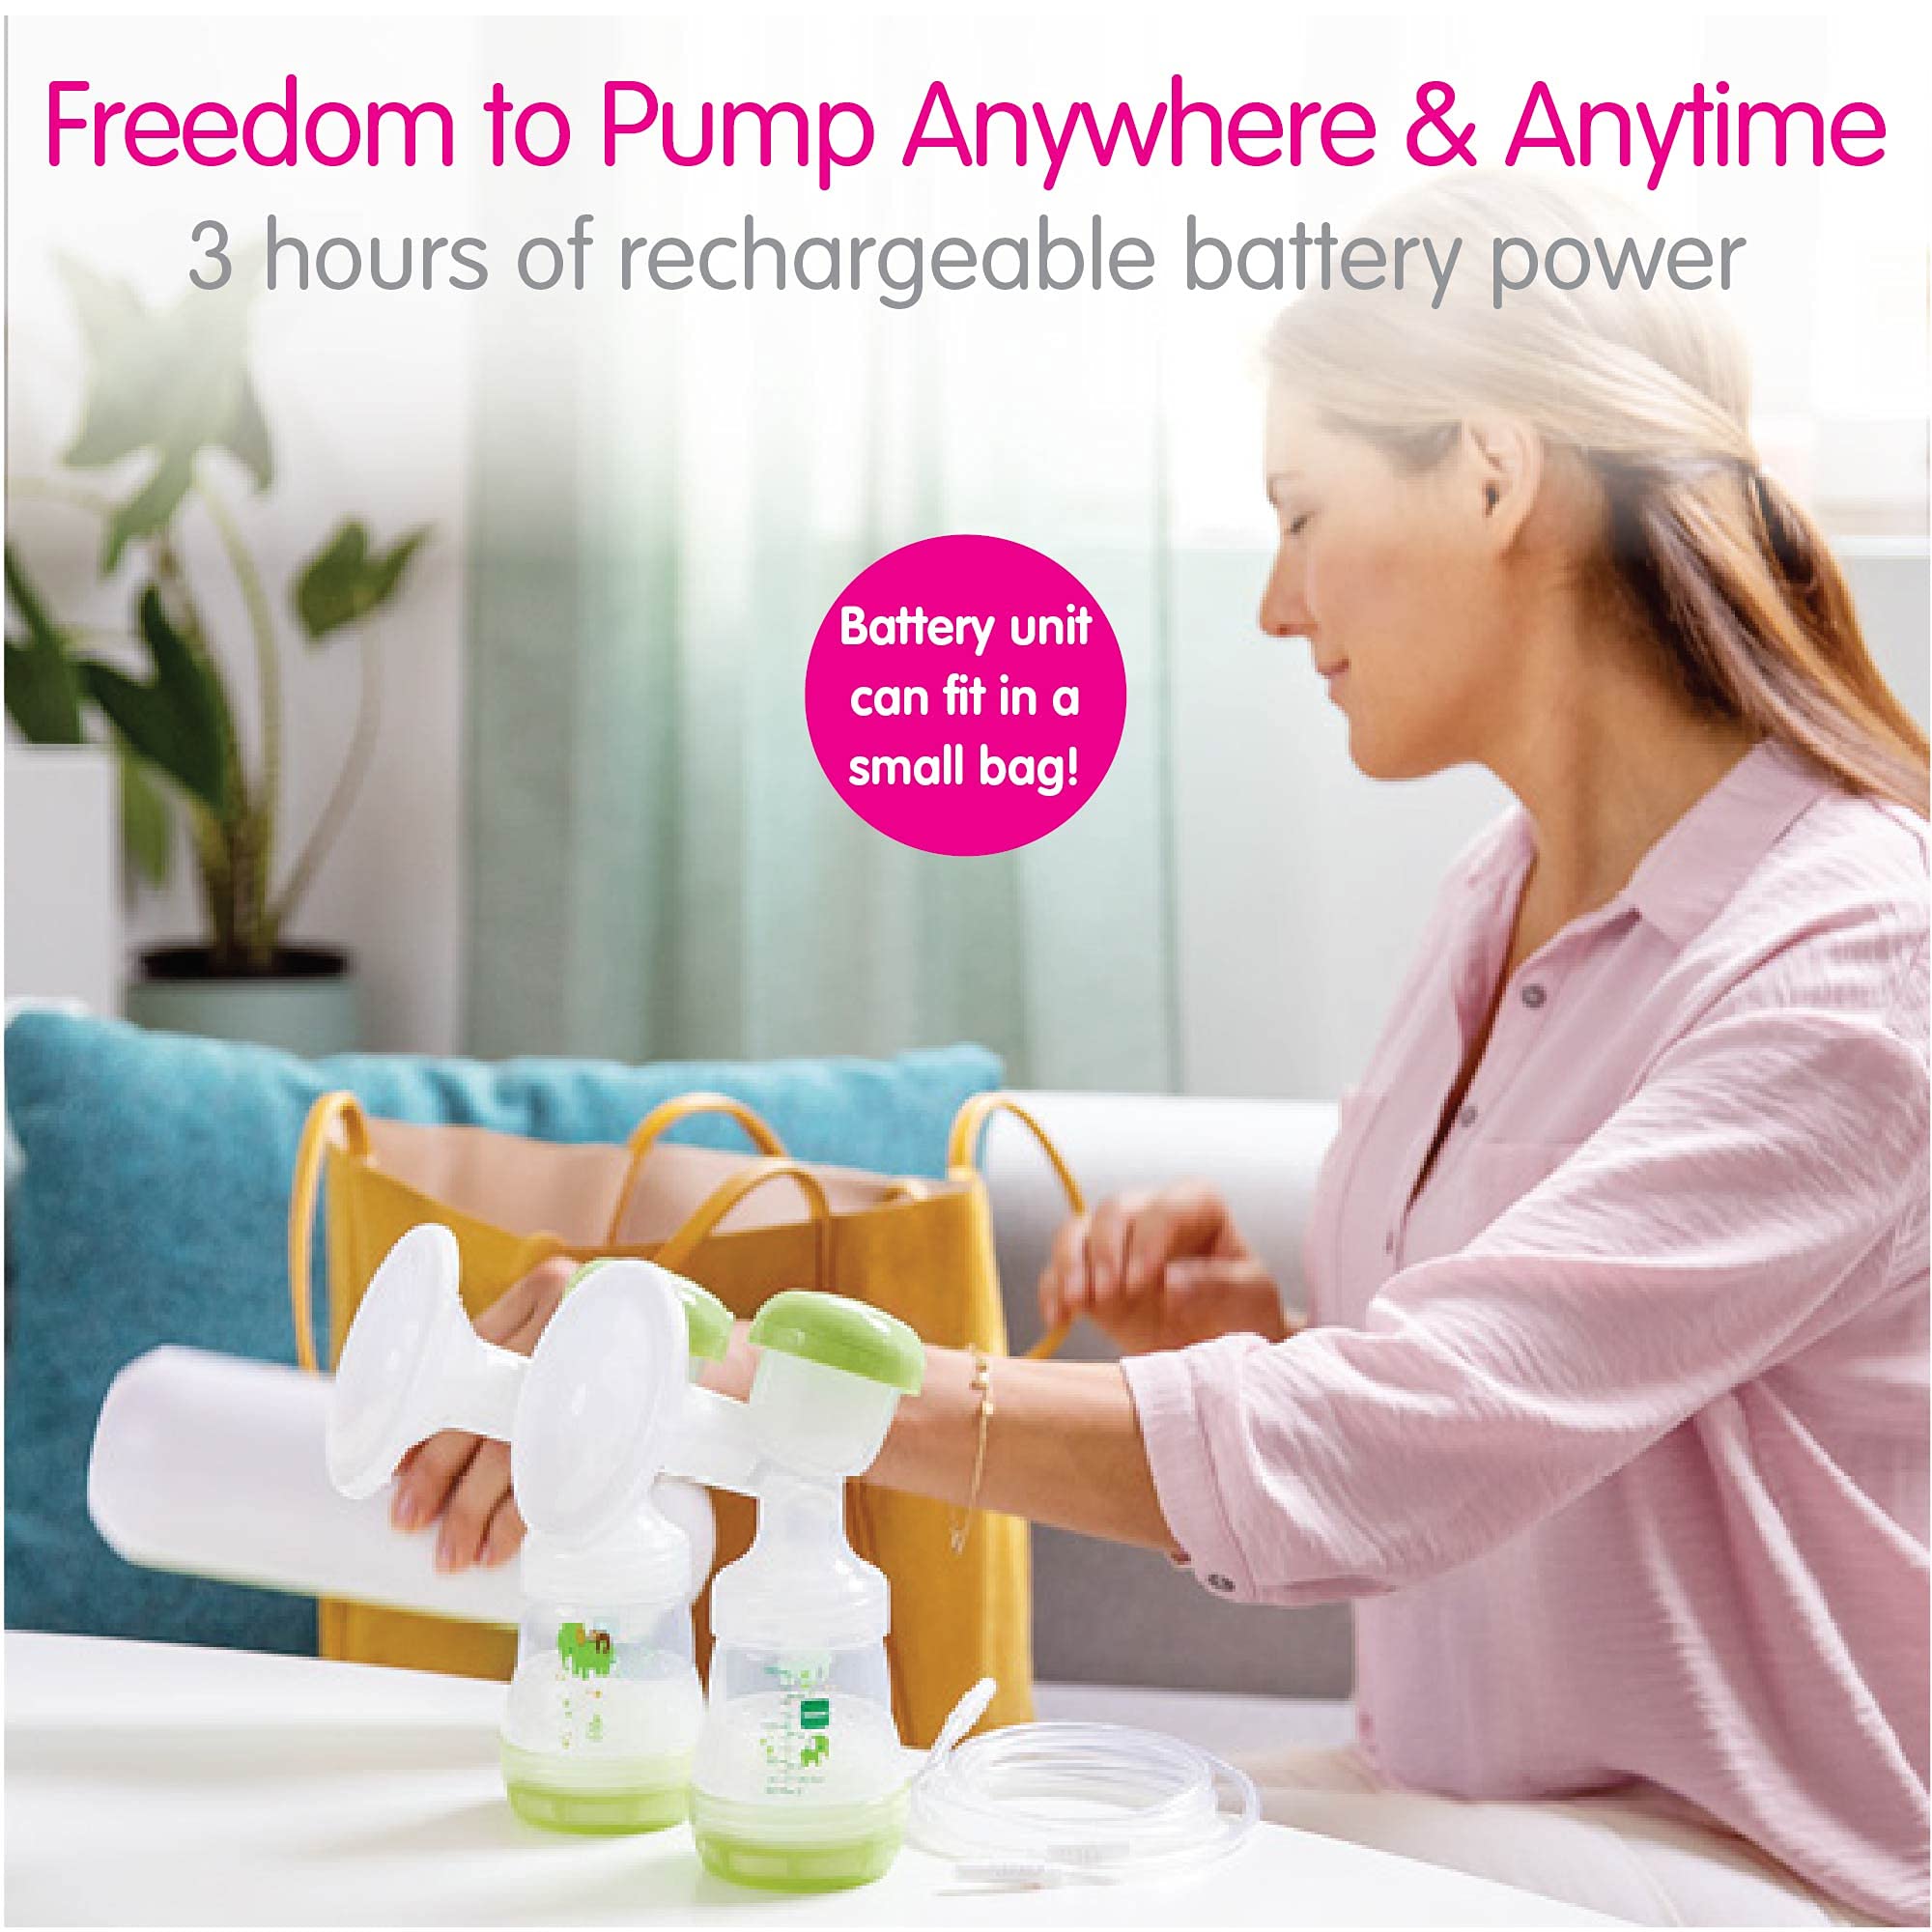 MAM 2-in-1 Double Electric Breast Pump & Manual Breast Pump, Portable Breast Pump with 2 Easy Start Anti-Colic Bottles & Breastfeeding Supplies